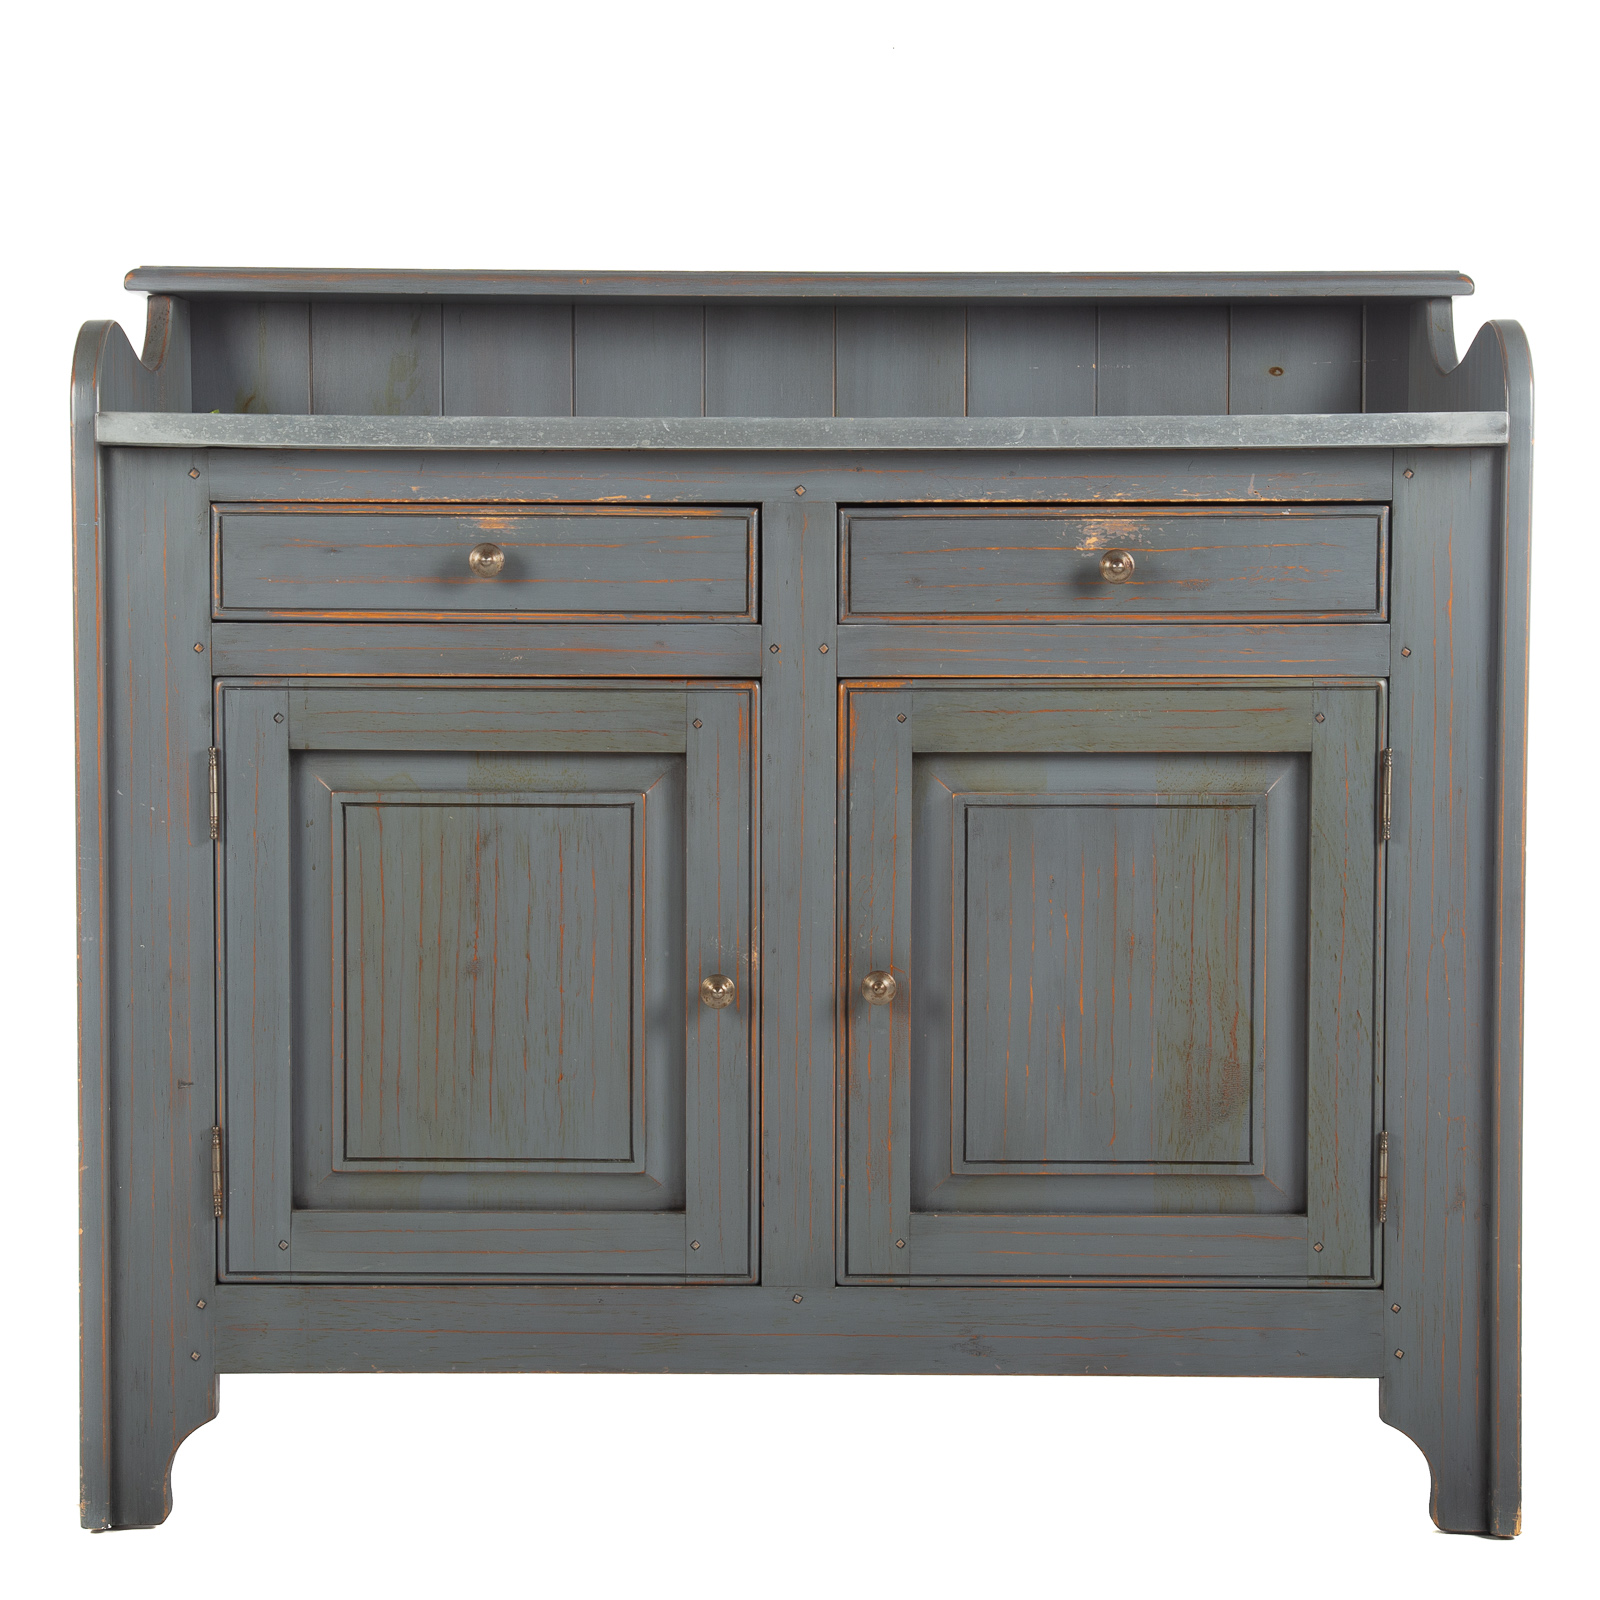 RUSTIC STYLE PAINTED WOOD BUFFET 20th